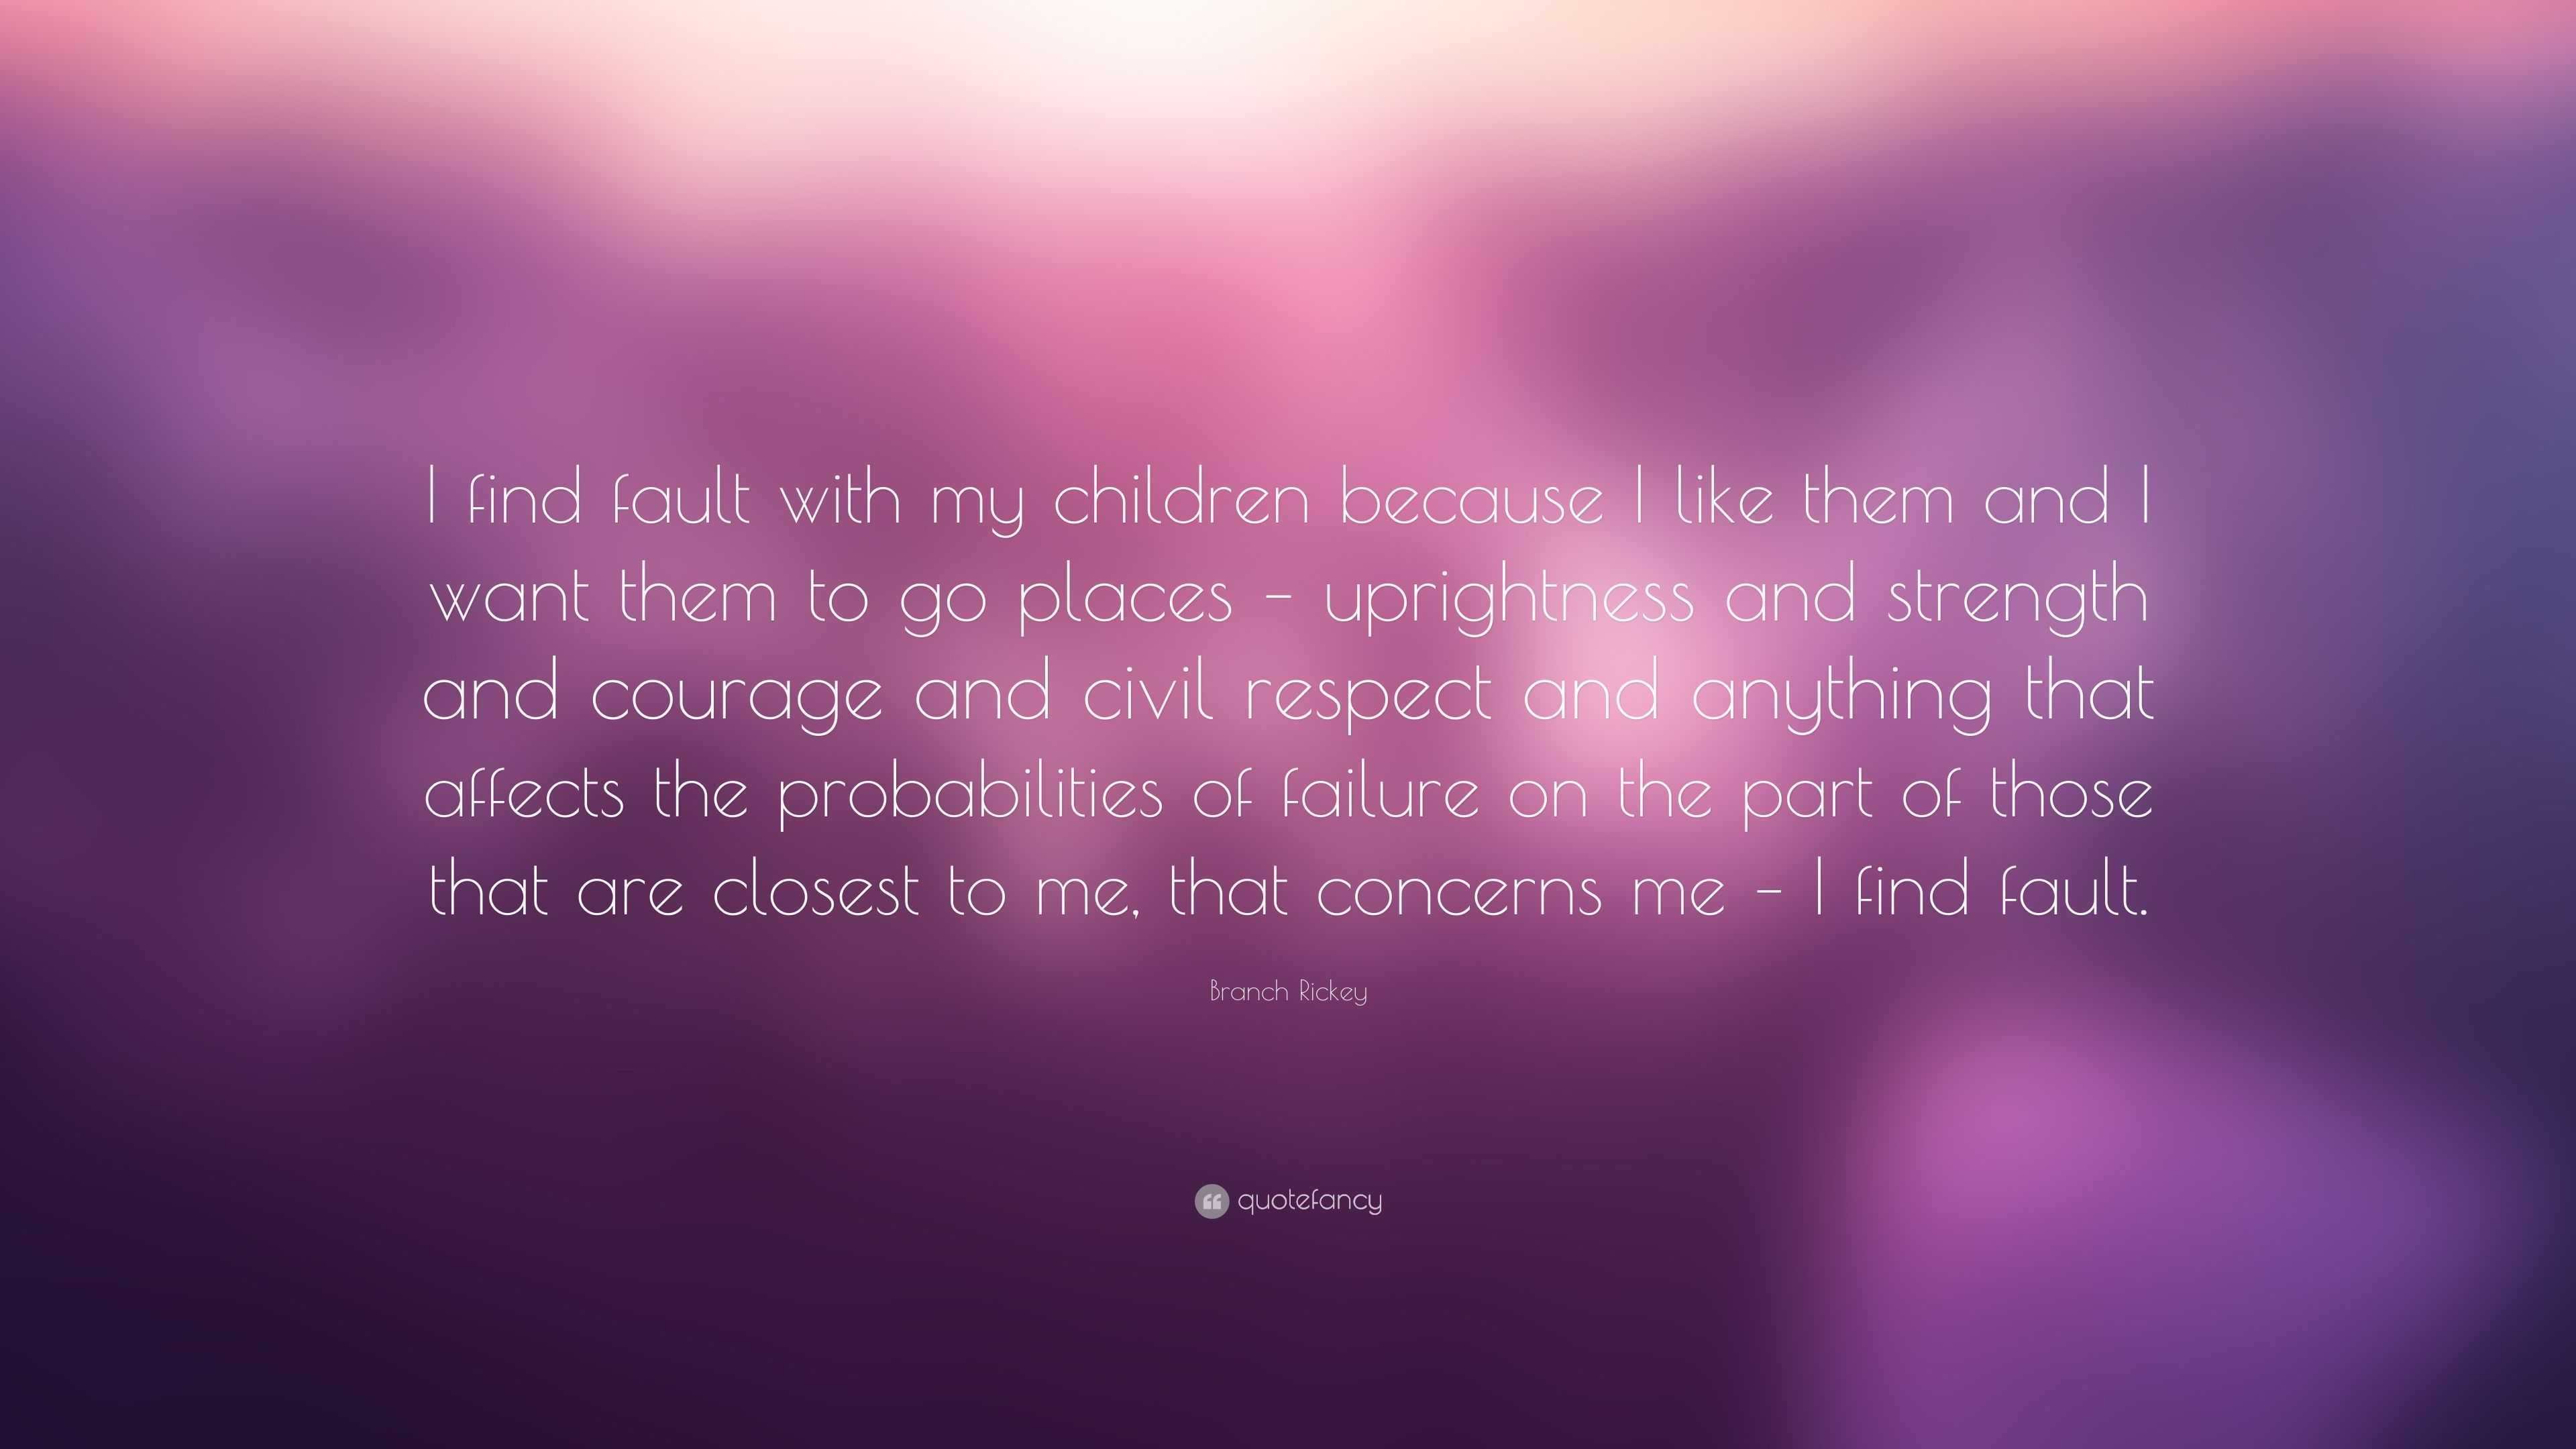 Branch Rickey Quote: “I find fault with my children because I like them ...